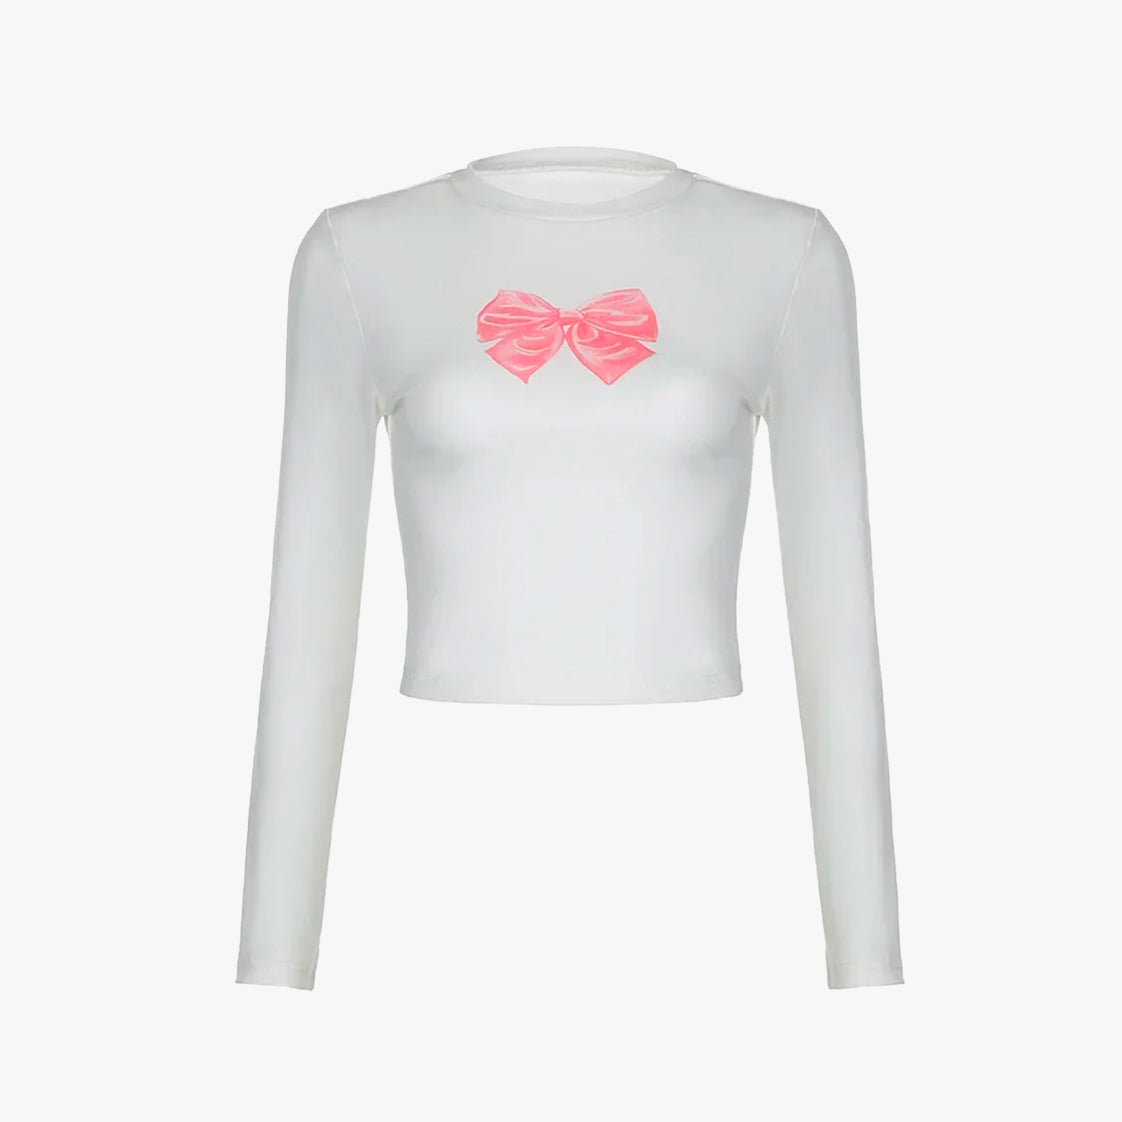 Dollette Bow Long Sleeve Top